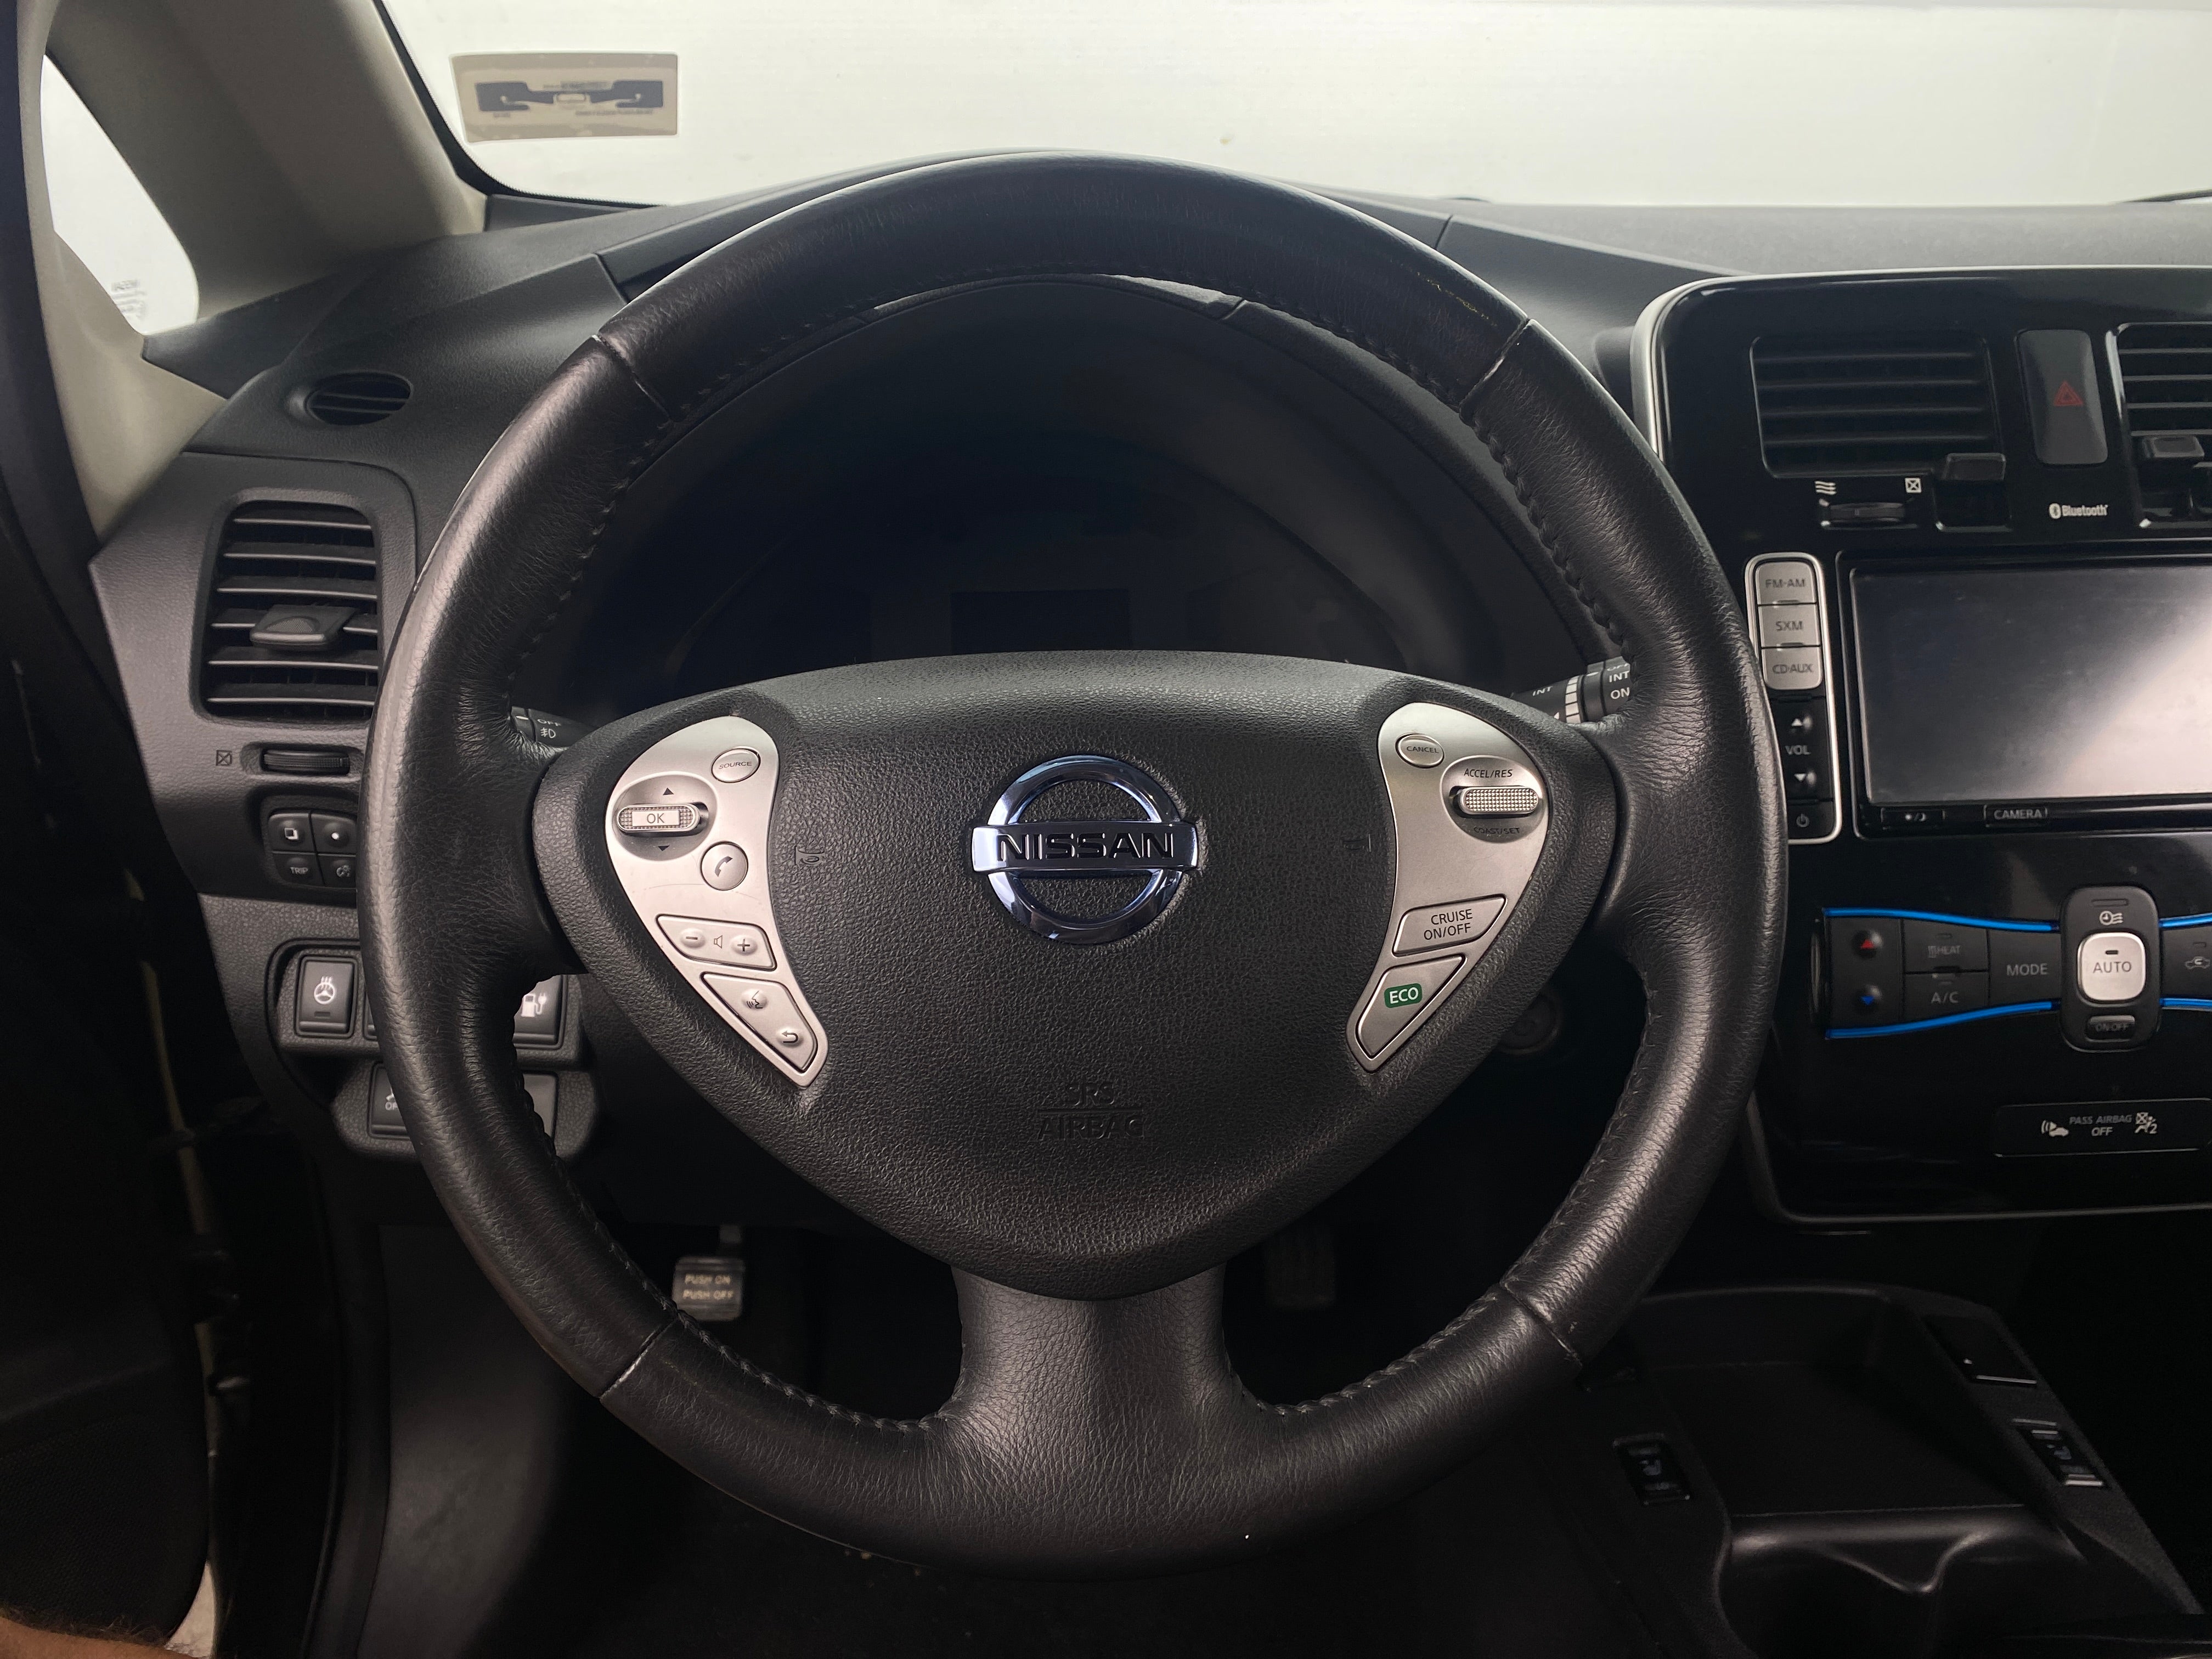 Used 2016 Nissan LEAF SL with VIN 1N4BZ0CPXGC311943 for sale in Auburn, WA